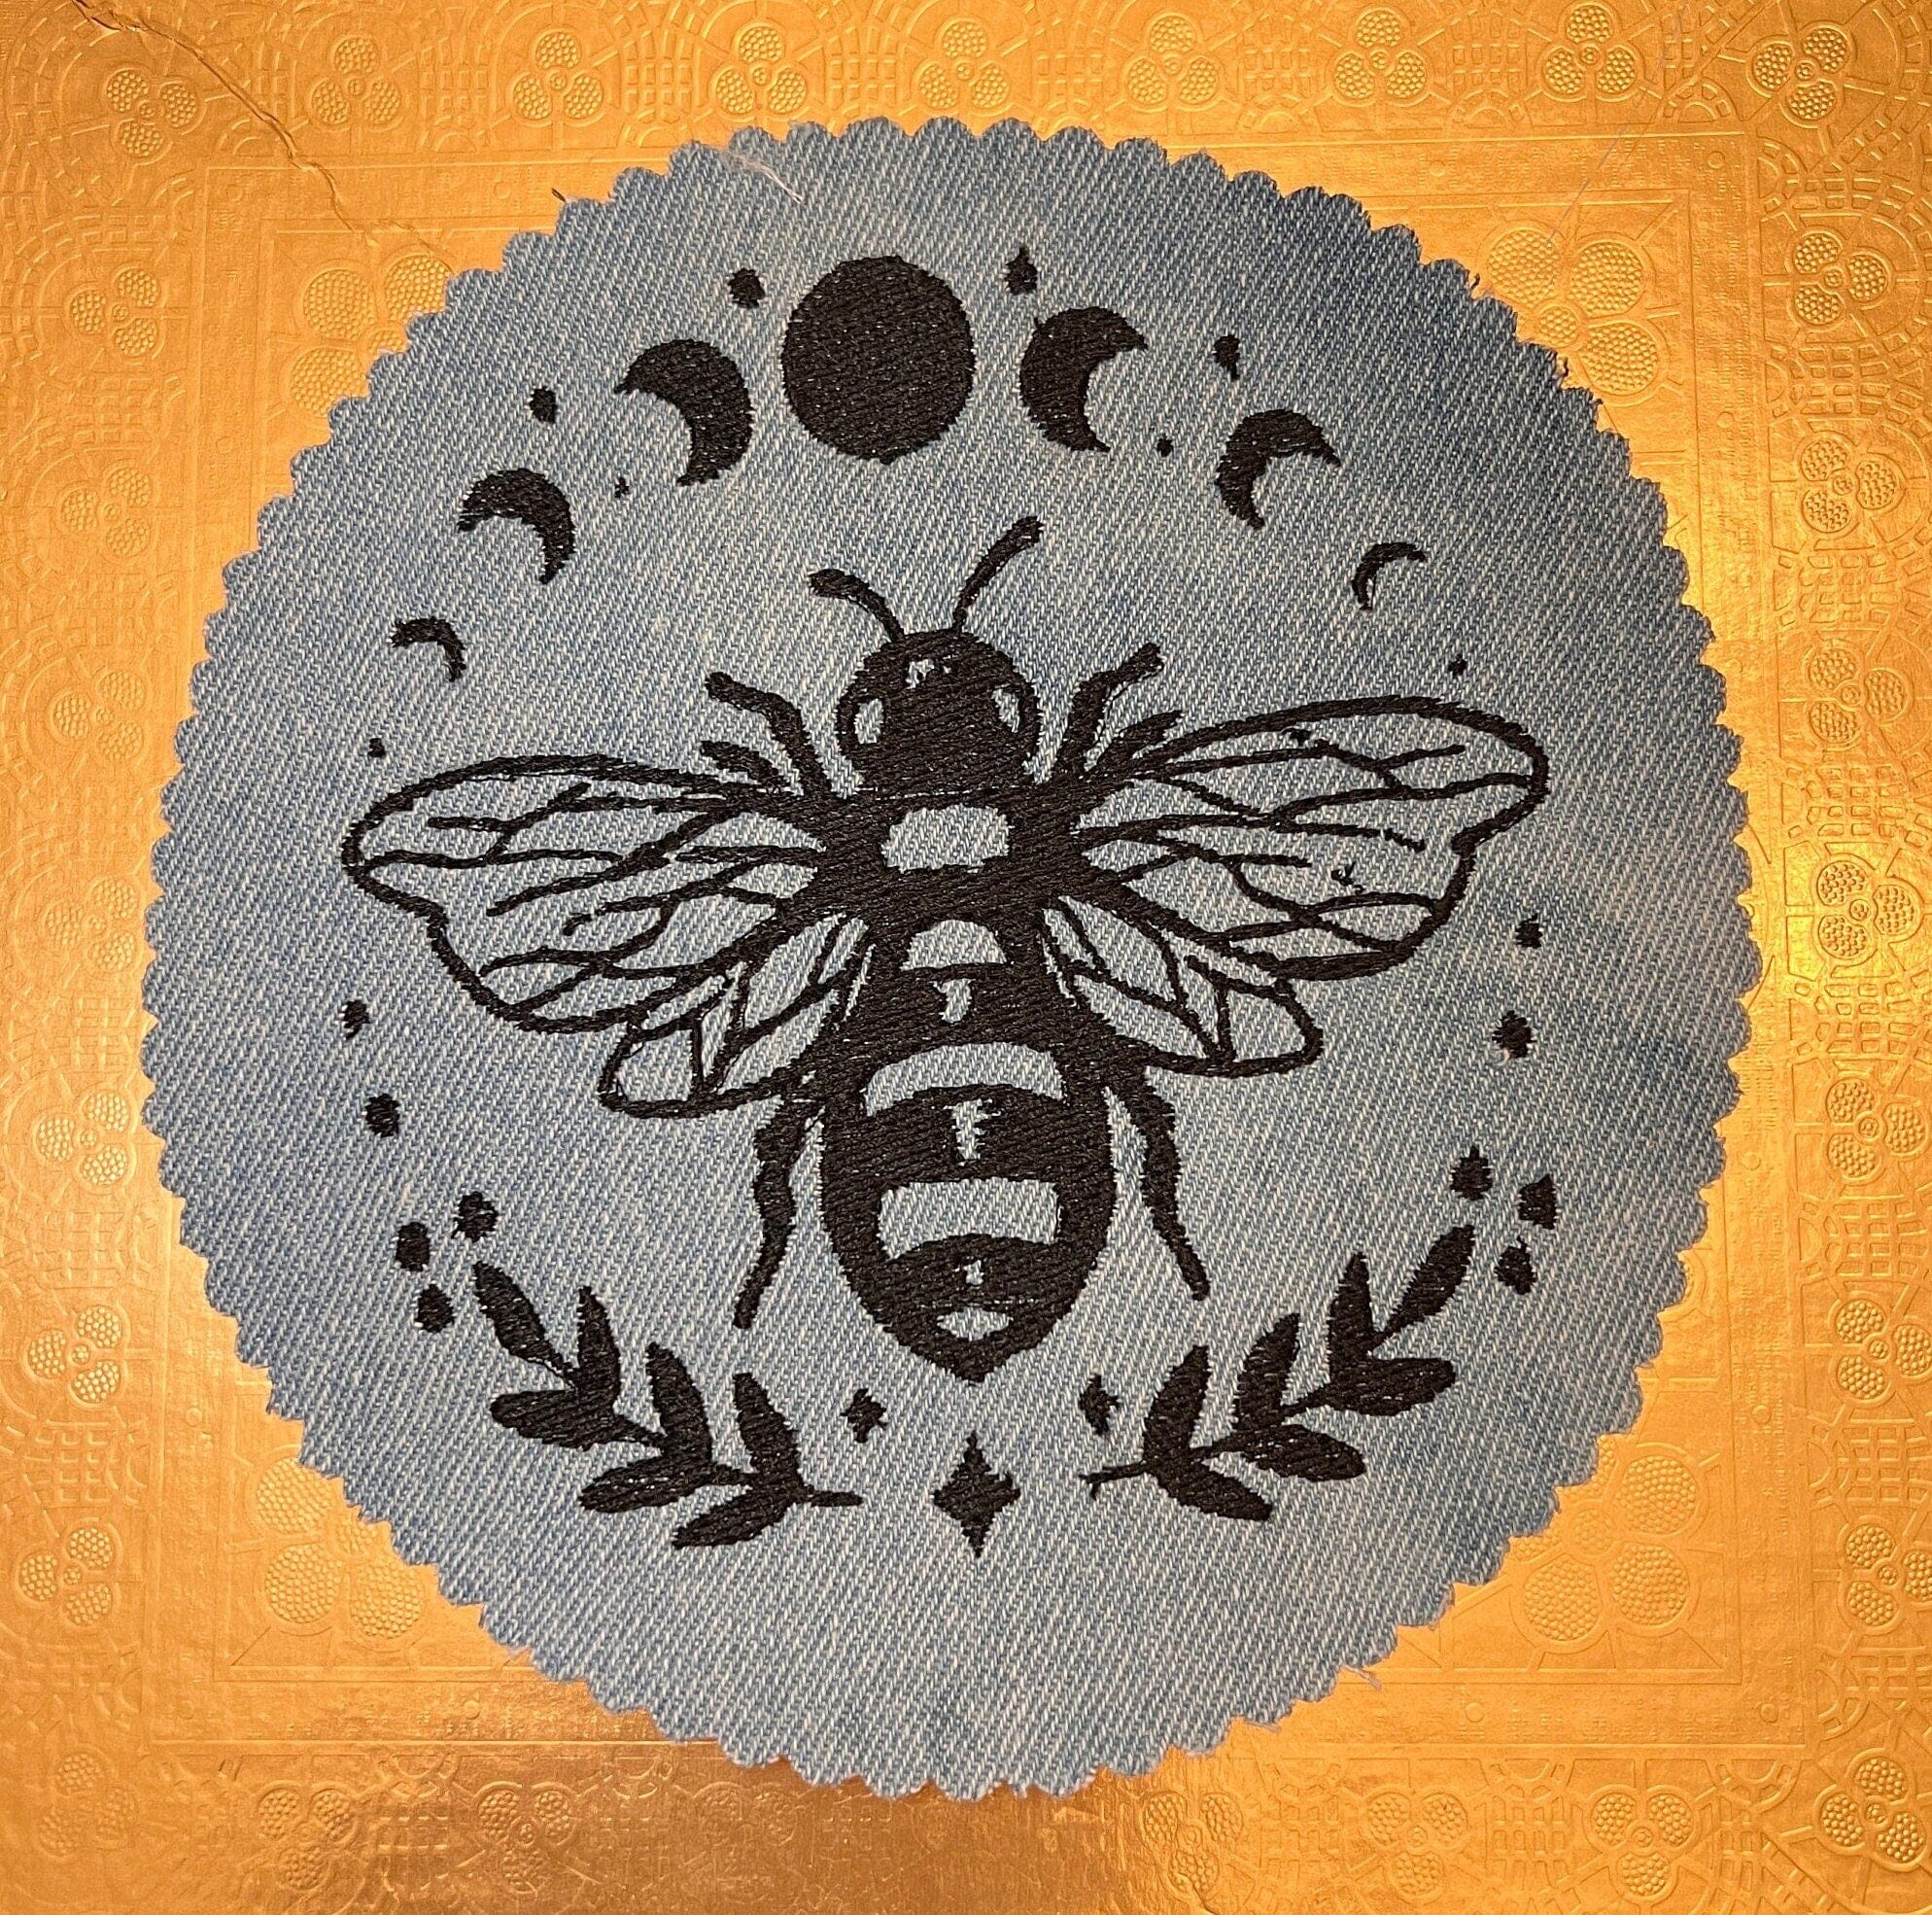 Celestial Bee handmade SOULE PATCH - Moon Phases embroidered bleached light Denim 6 in Iron On Decal Round Bees Honey patchwork Astrological Appliques & Patches